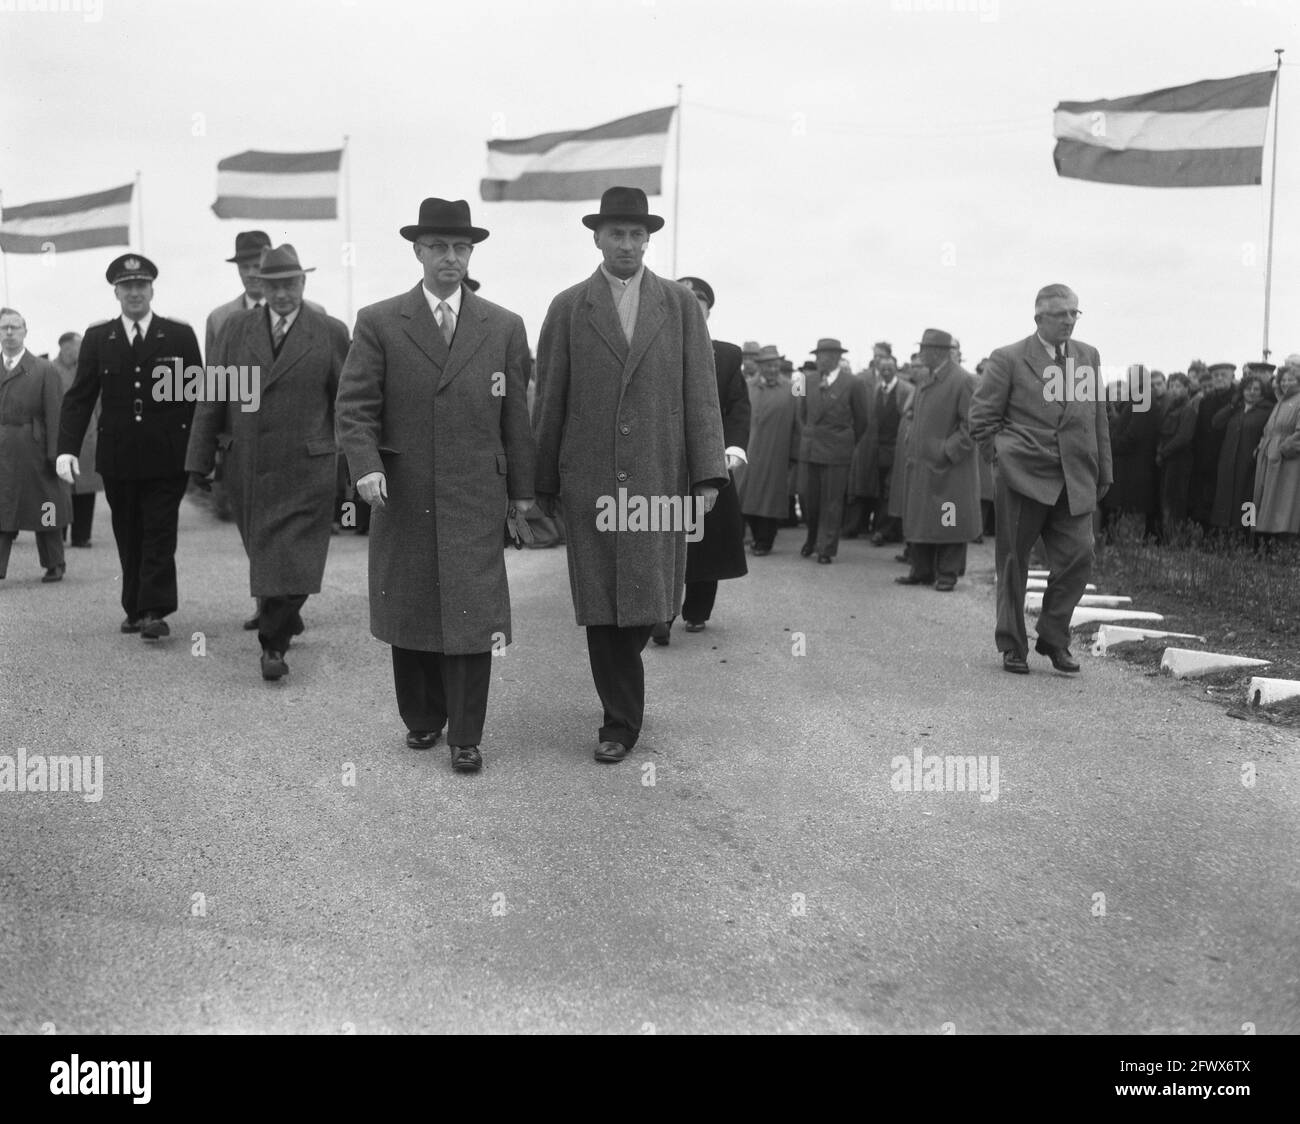 Opening Flevoweg near Kampen. Minister Algera, May 3, 1957, Openings, The Netherlands, 20th century press agency photo, news to remember, documentary, historic photography 1945-1990, visual stories, human history of the Twentieth Century, capturing moments in time Stock Photo